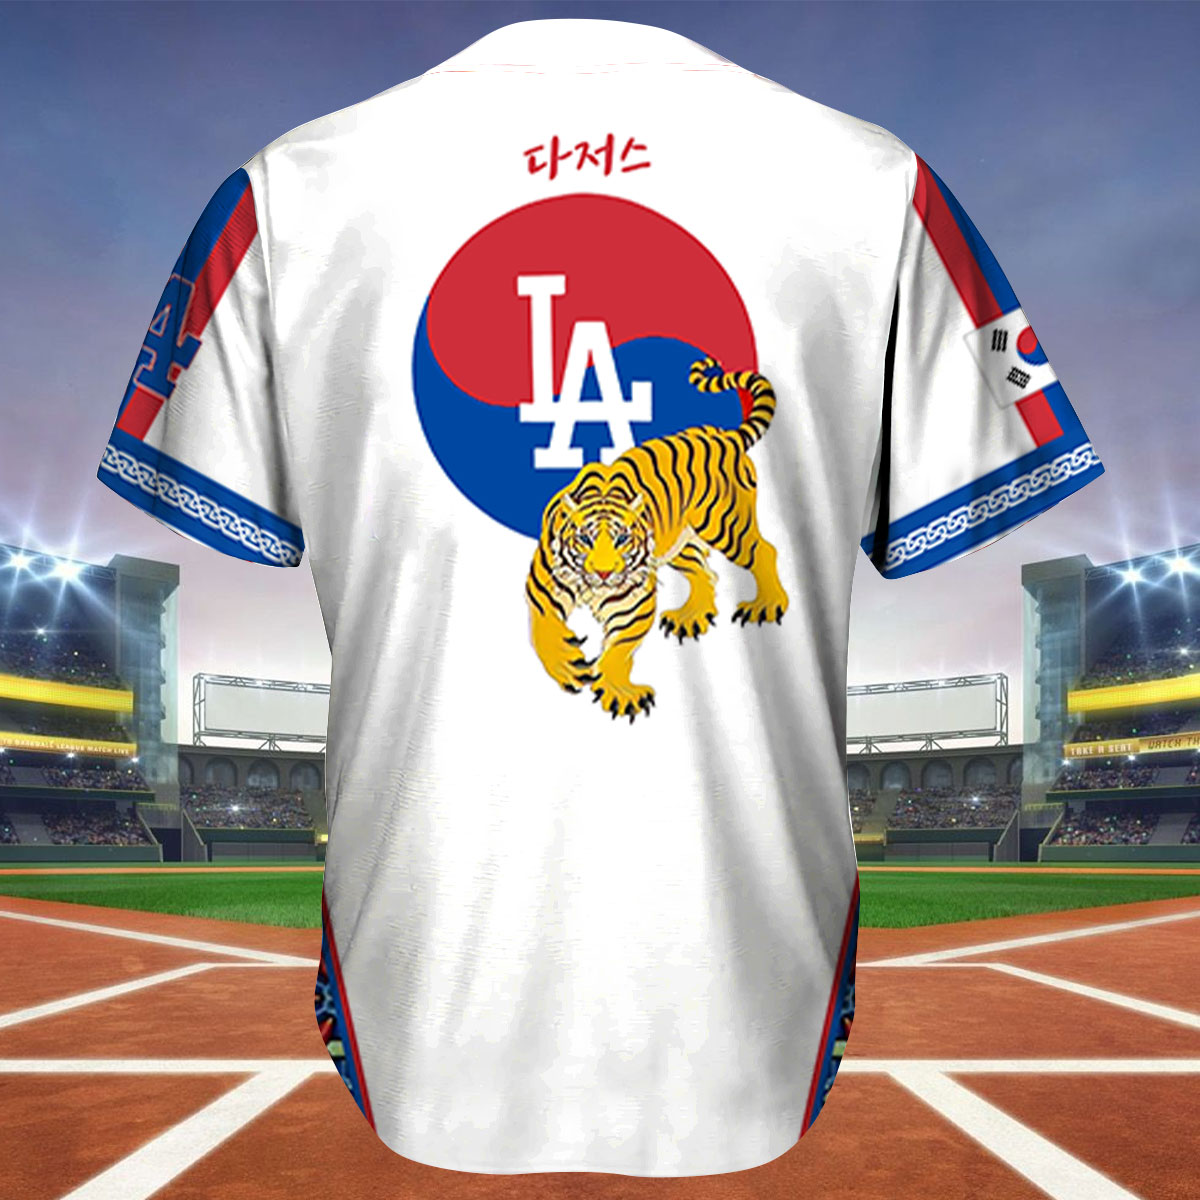 mlb jersey giveaway